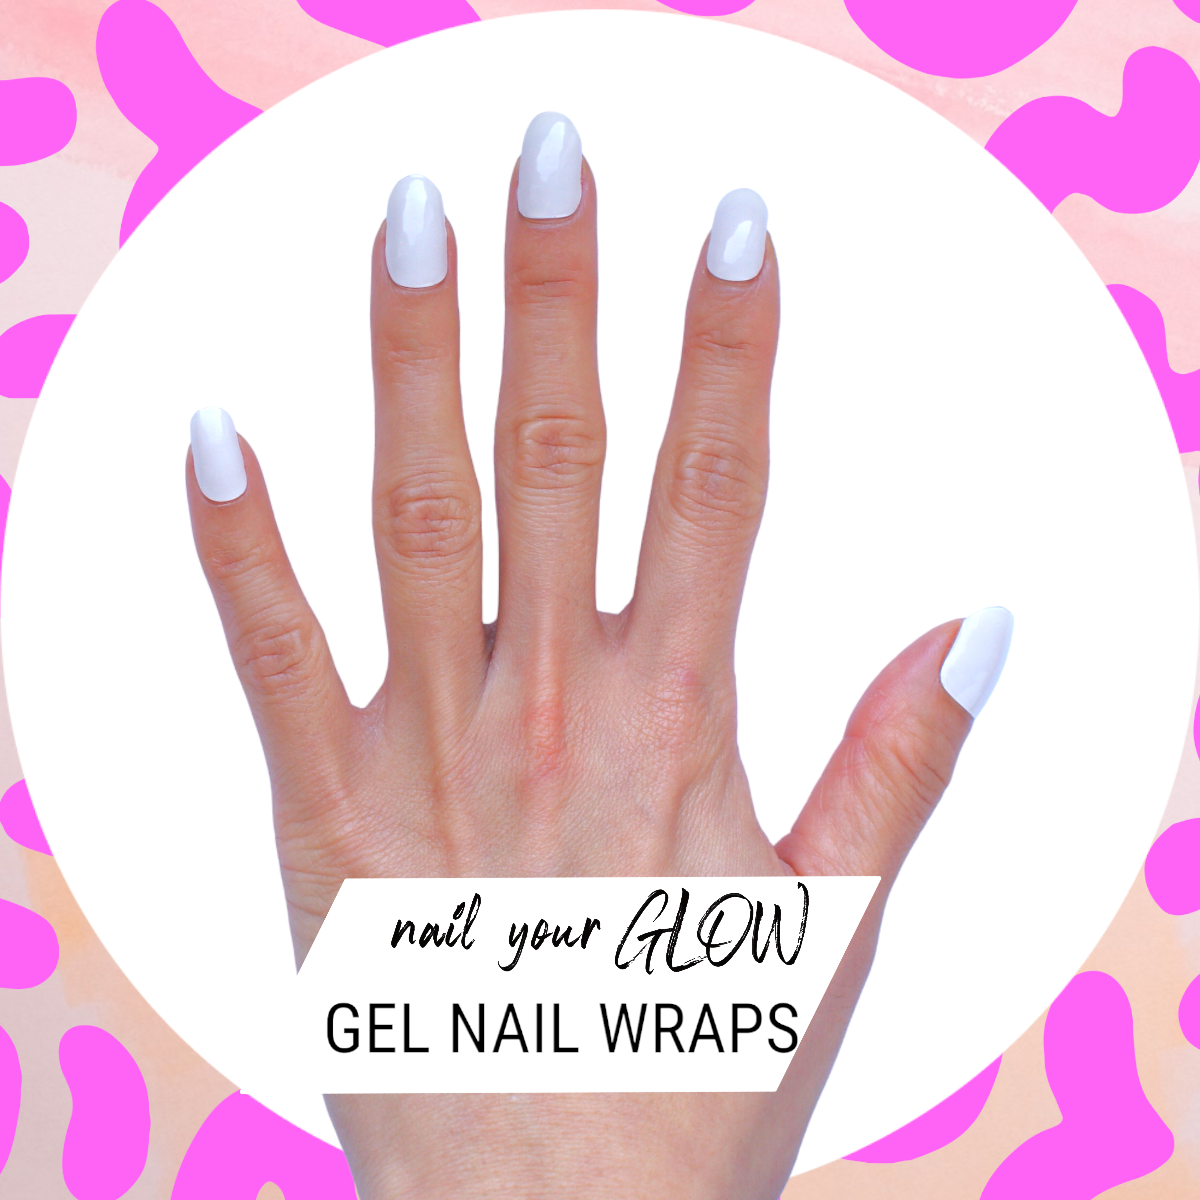 PALE PINK POWER - 20 Gel Nail Wraps by Nail Your GLOW